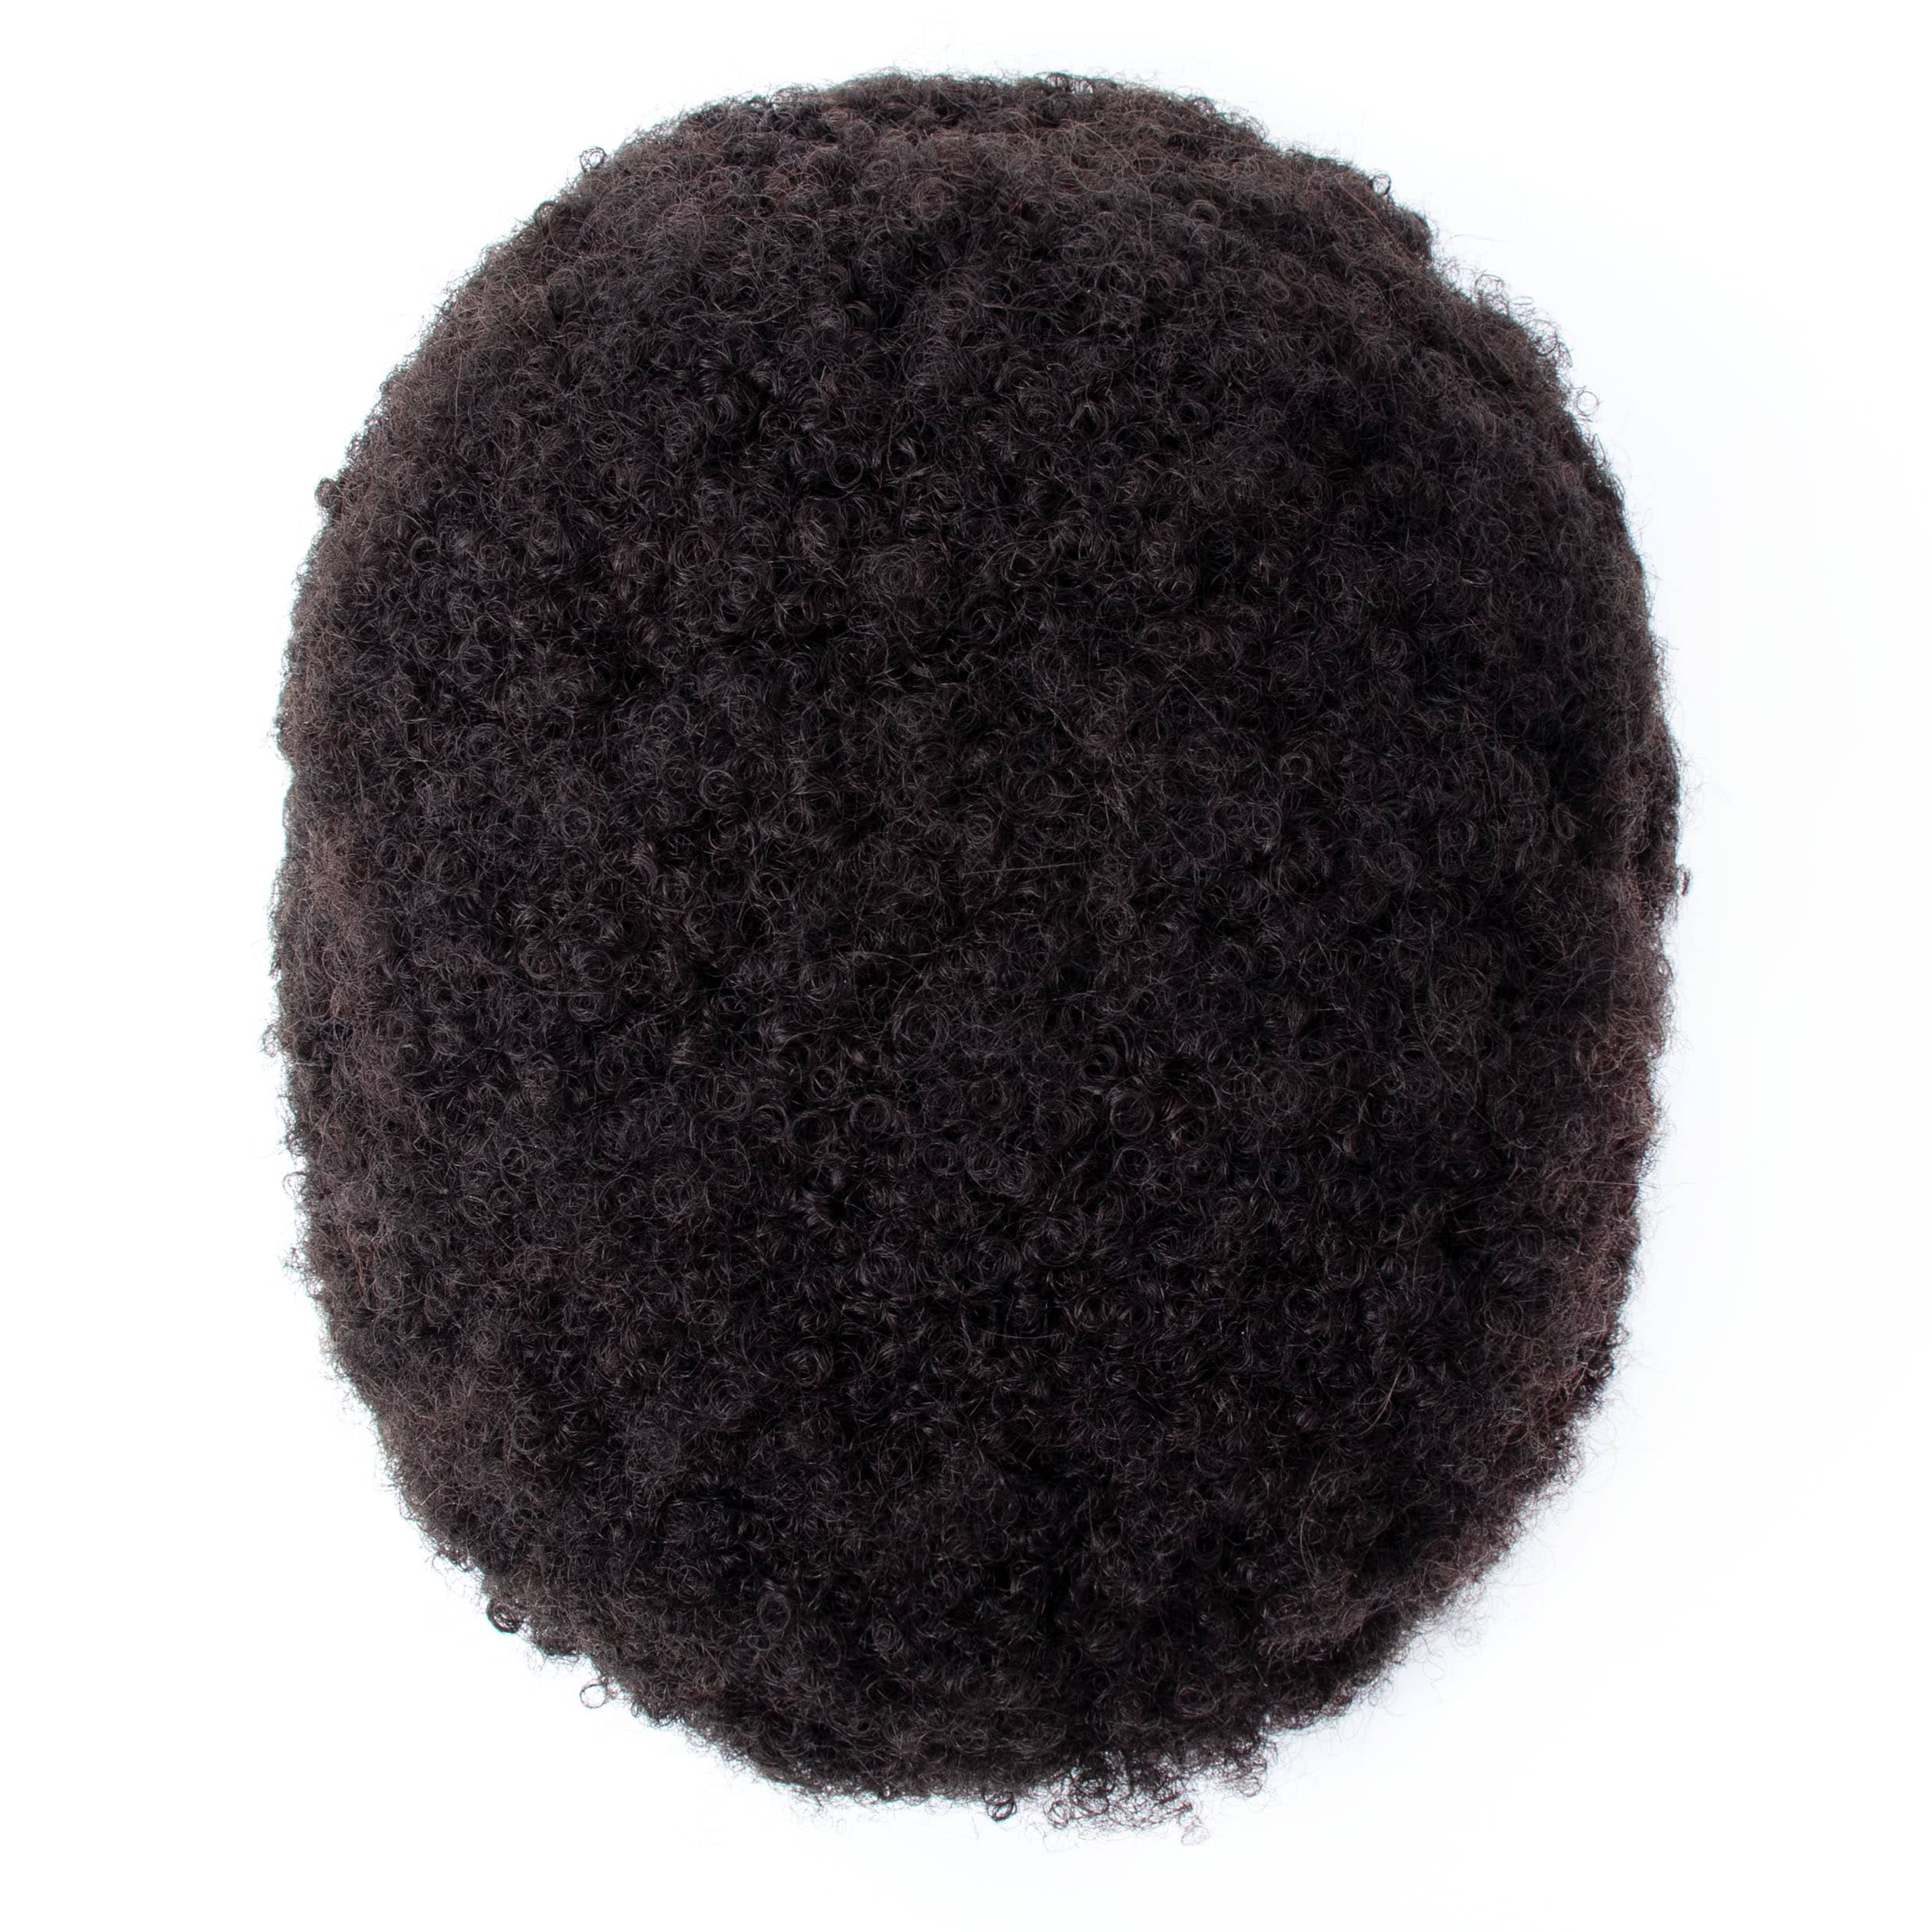 GEXWIGS African American Afro Men’s Hair System with 0.12mm V-looped Skin Base